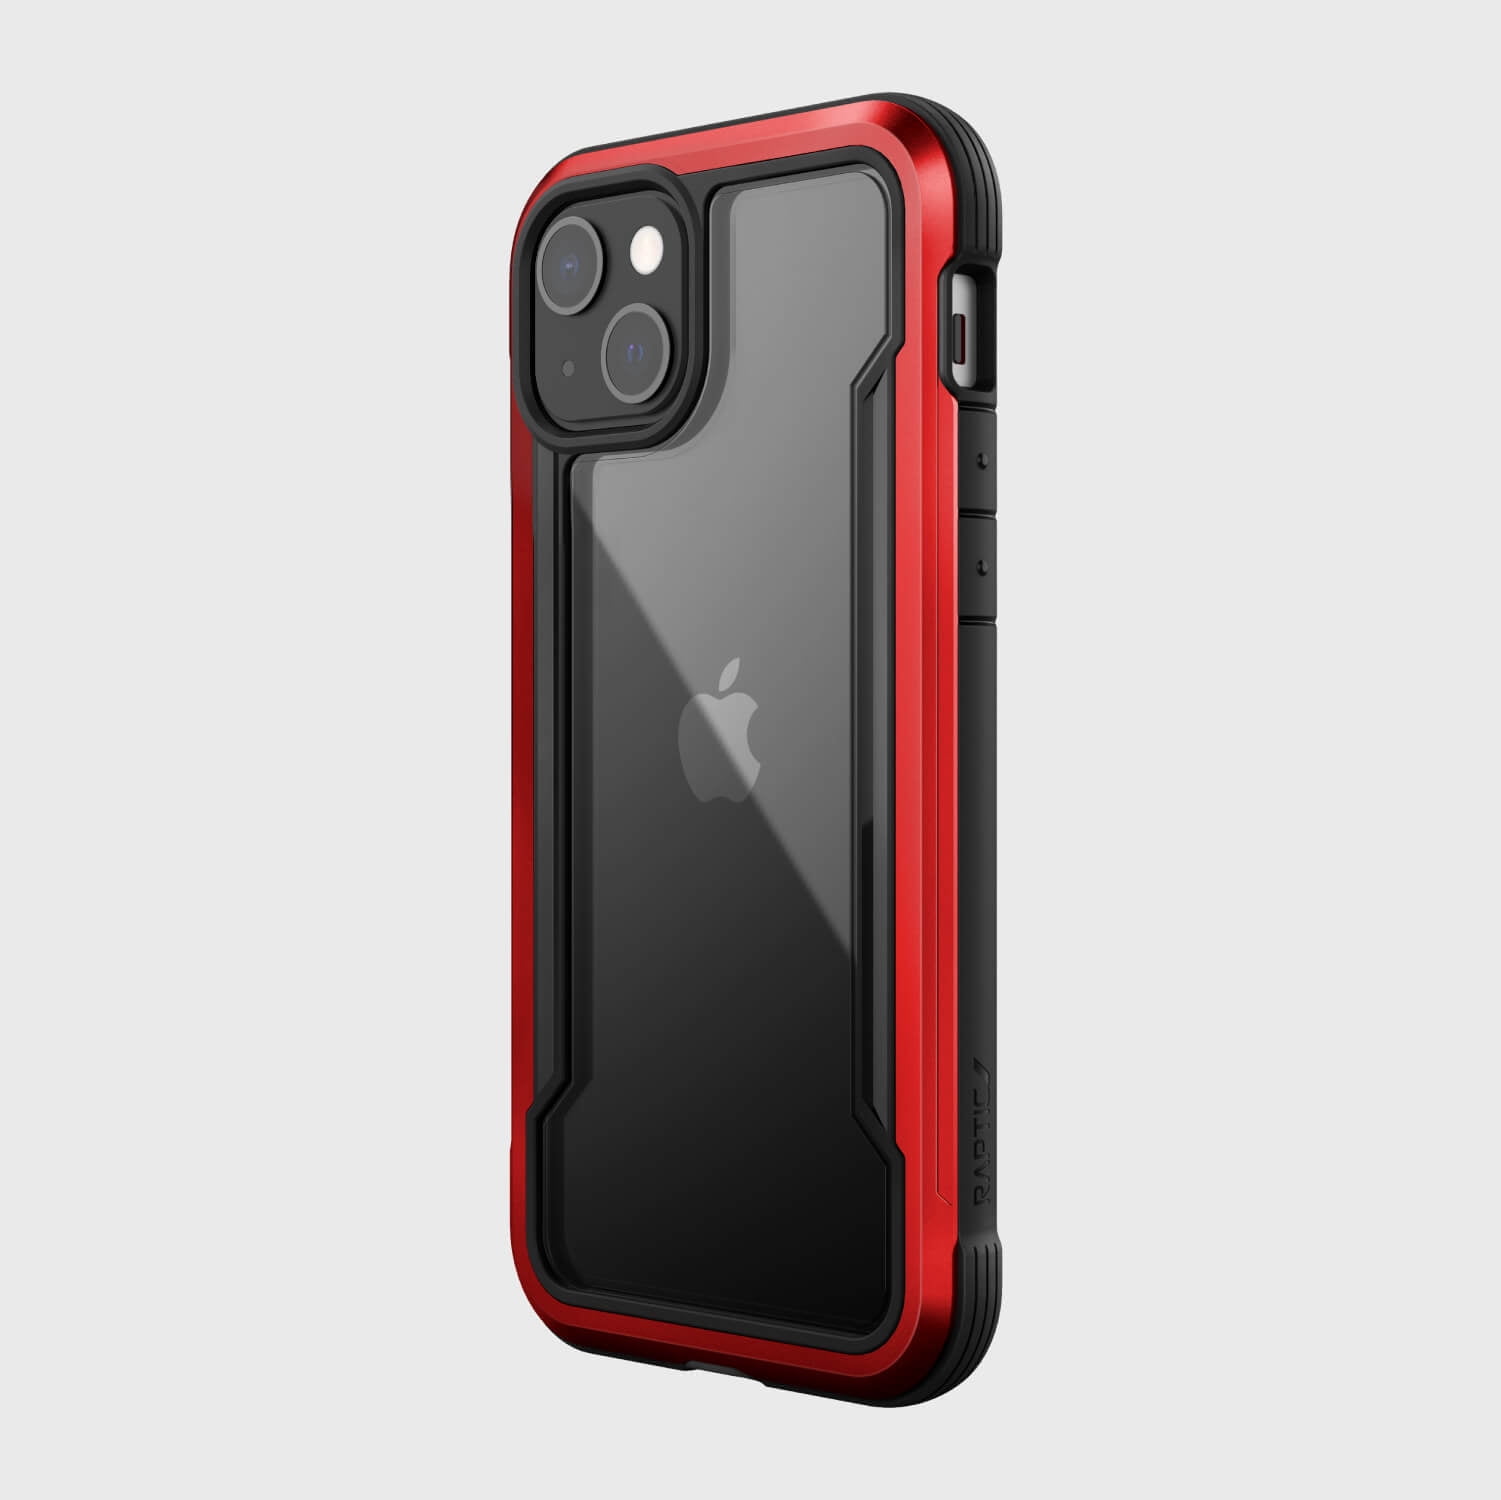 Raptic Shield Case Compatible with iPhone 13 Case, Shock Absorbing Protection, Durable Aluminum Frame, 10ft Drop Tested, Fits iPhone 13, Red